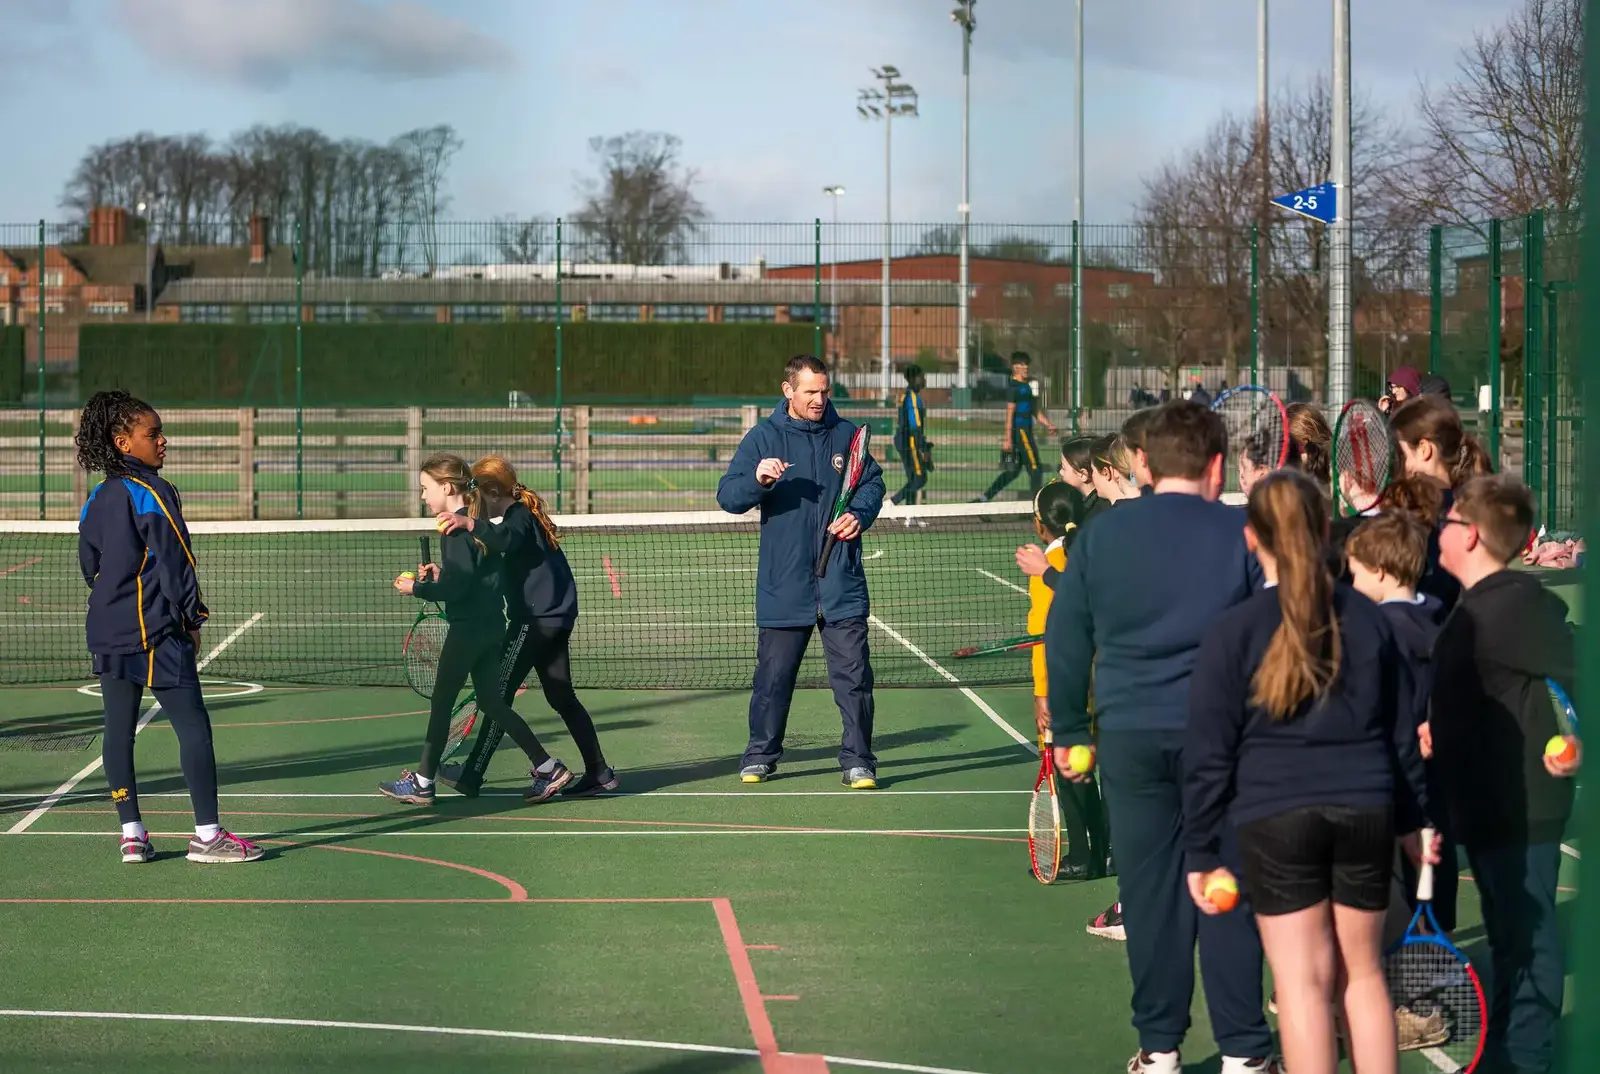 Chapter House pupils engaging in sports activities